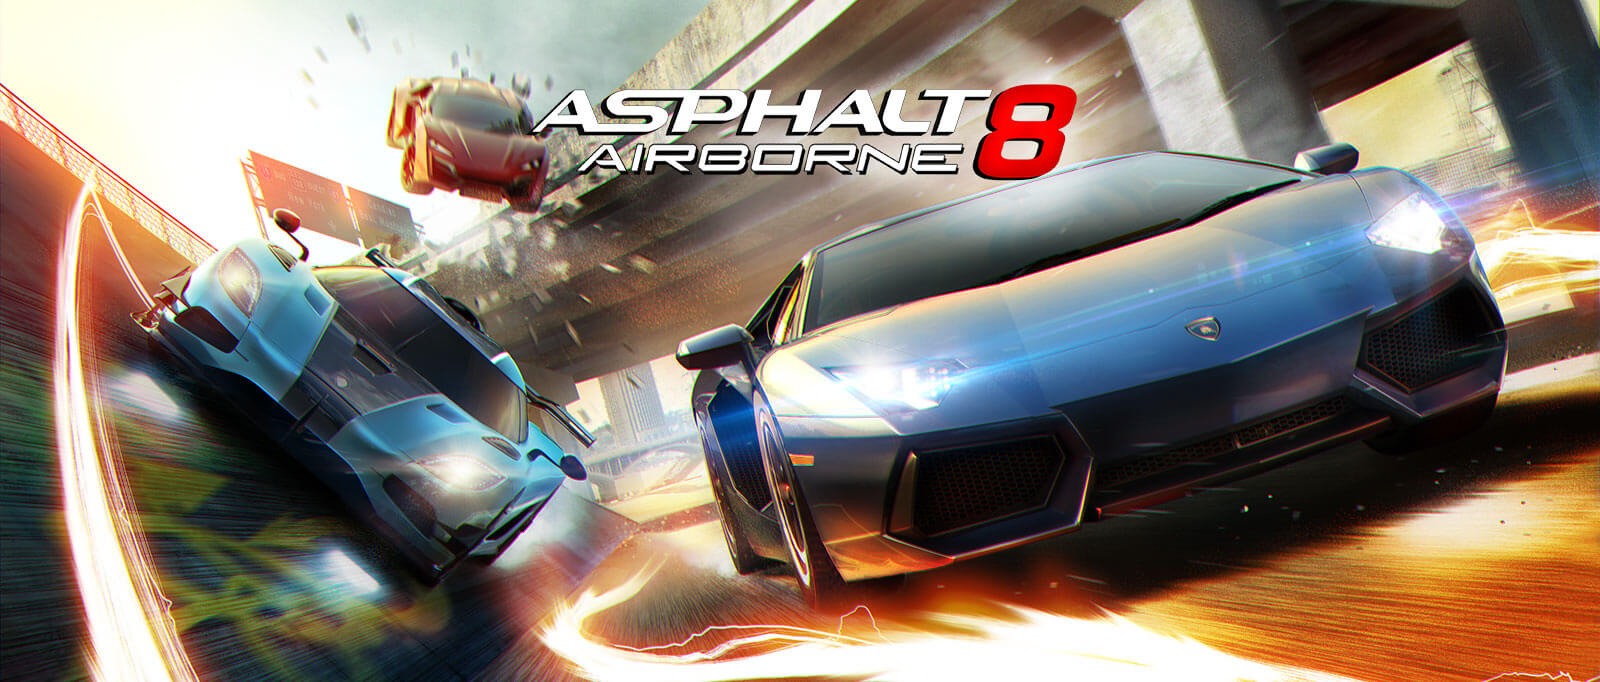 Asphalt 8 is the best go to mobile game if you want to experience some great graphics